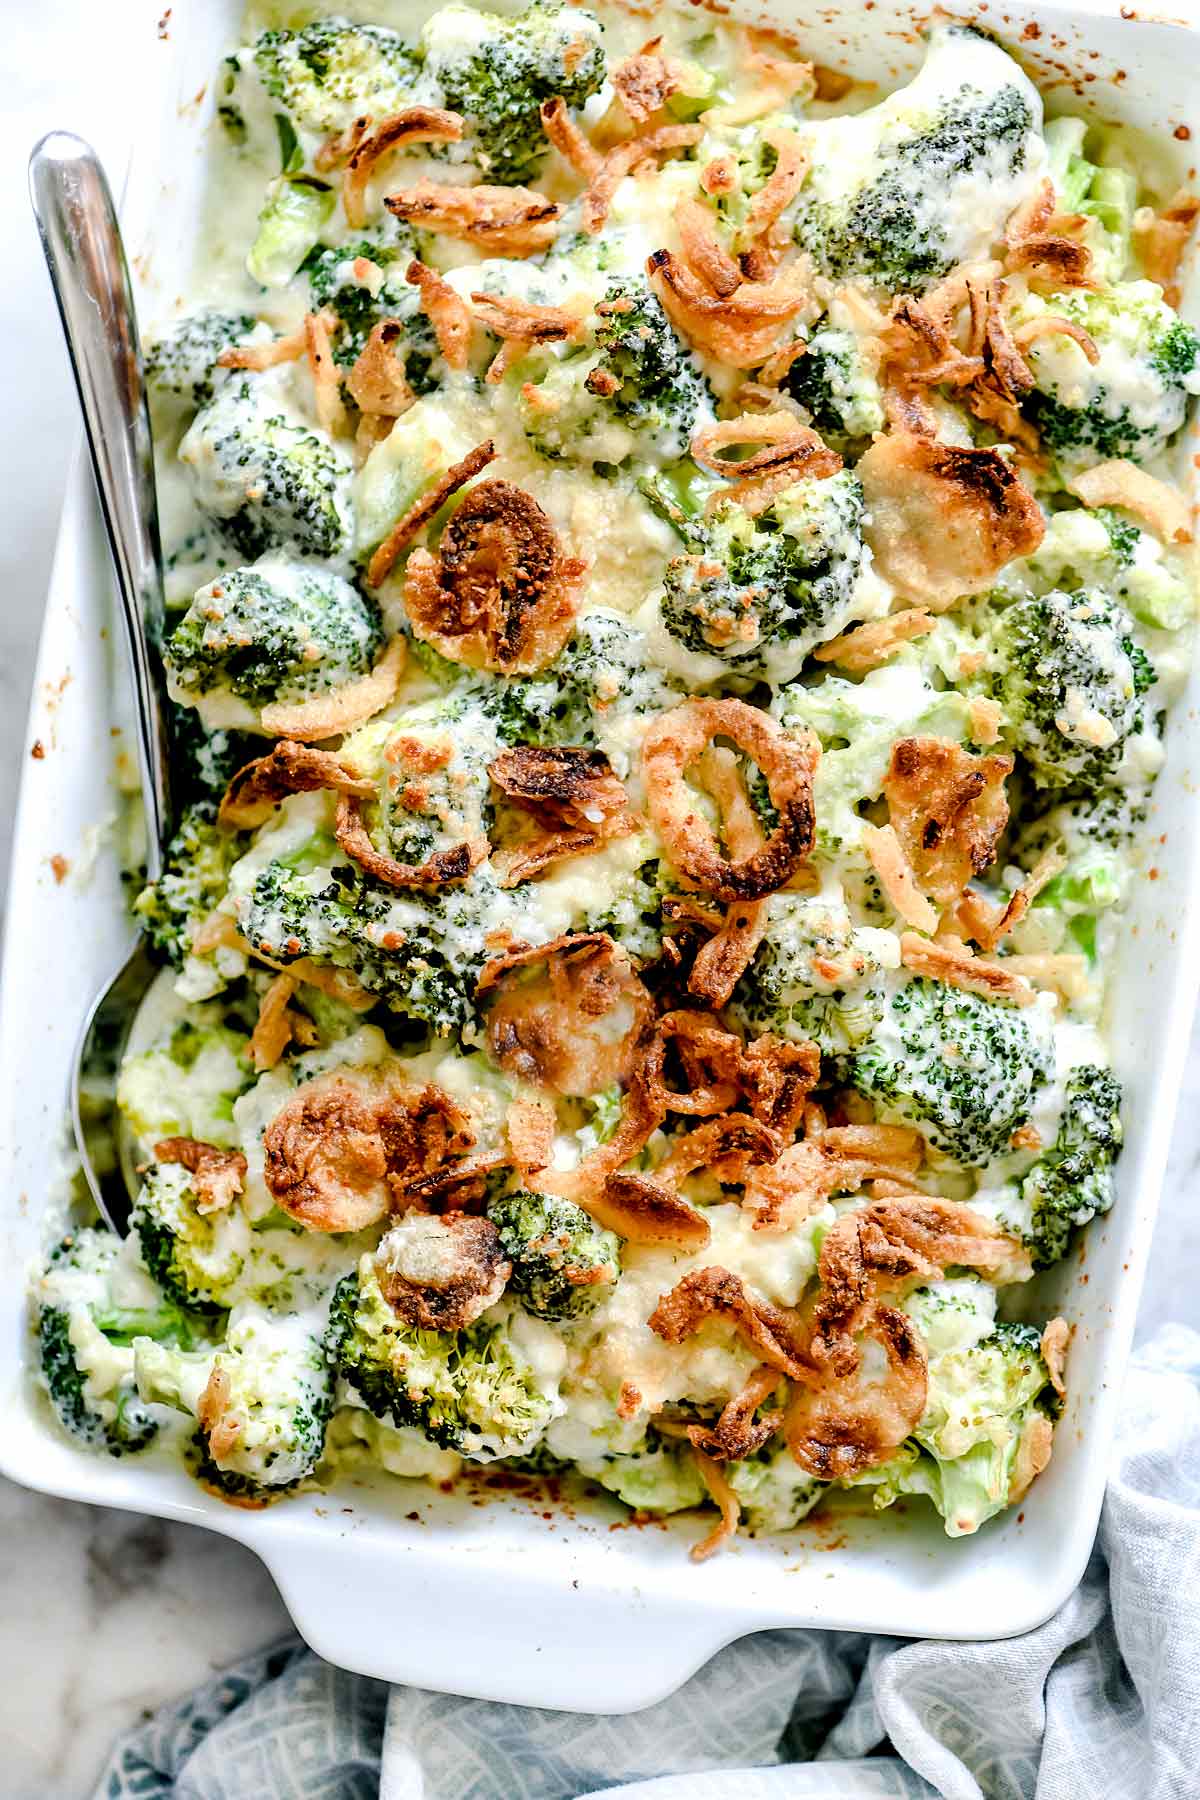 50 Thanksgiving Side Dishes Recipes | foodiecrush .com